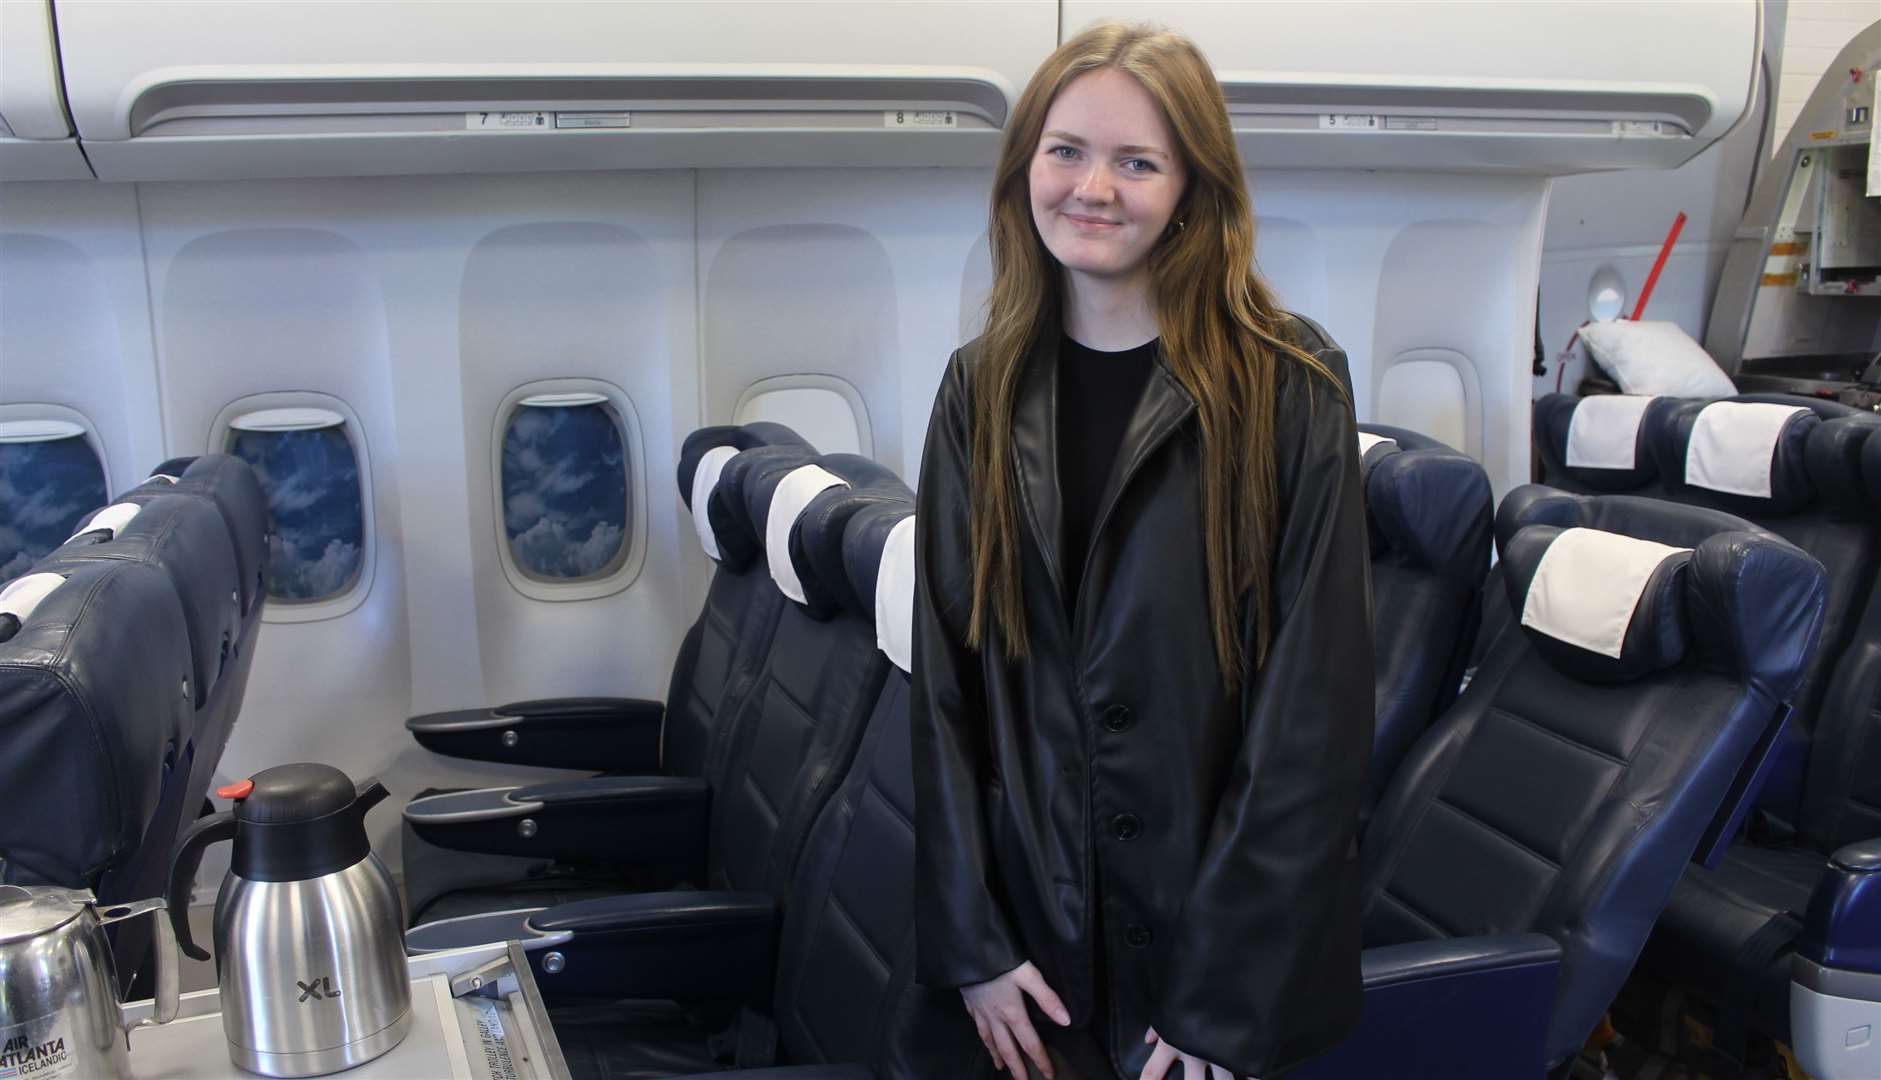 Travel & Tourism student Emilie Davies was "bowled over" when she saw the aeroplane cabin during an Open Day.